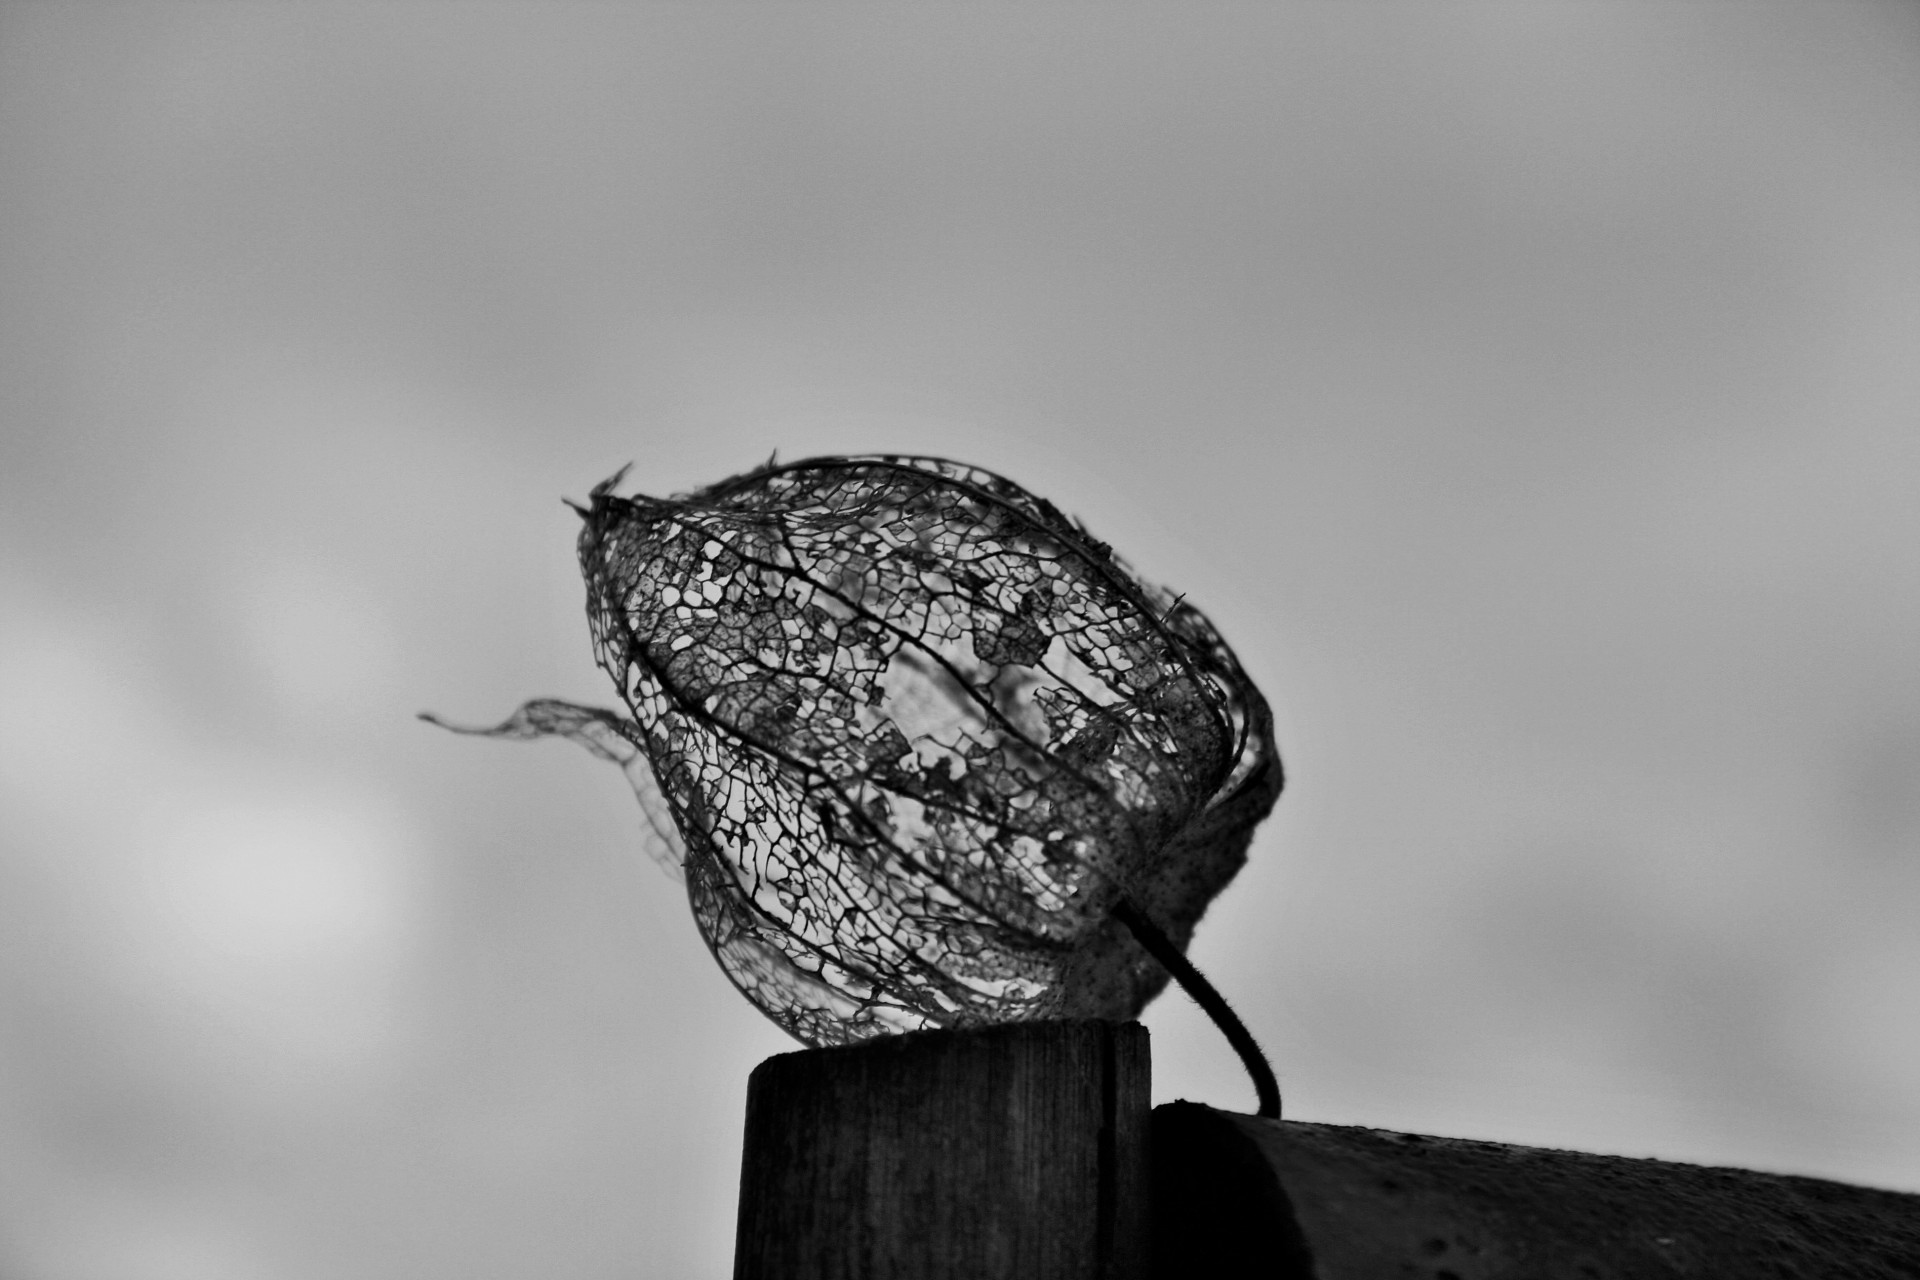 Cape,gooseberry,frayed,decayed,b&w - free image from needpix.com